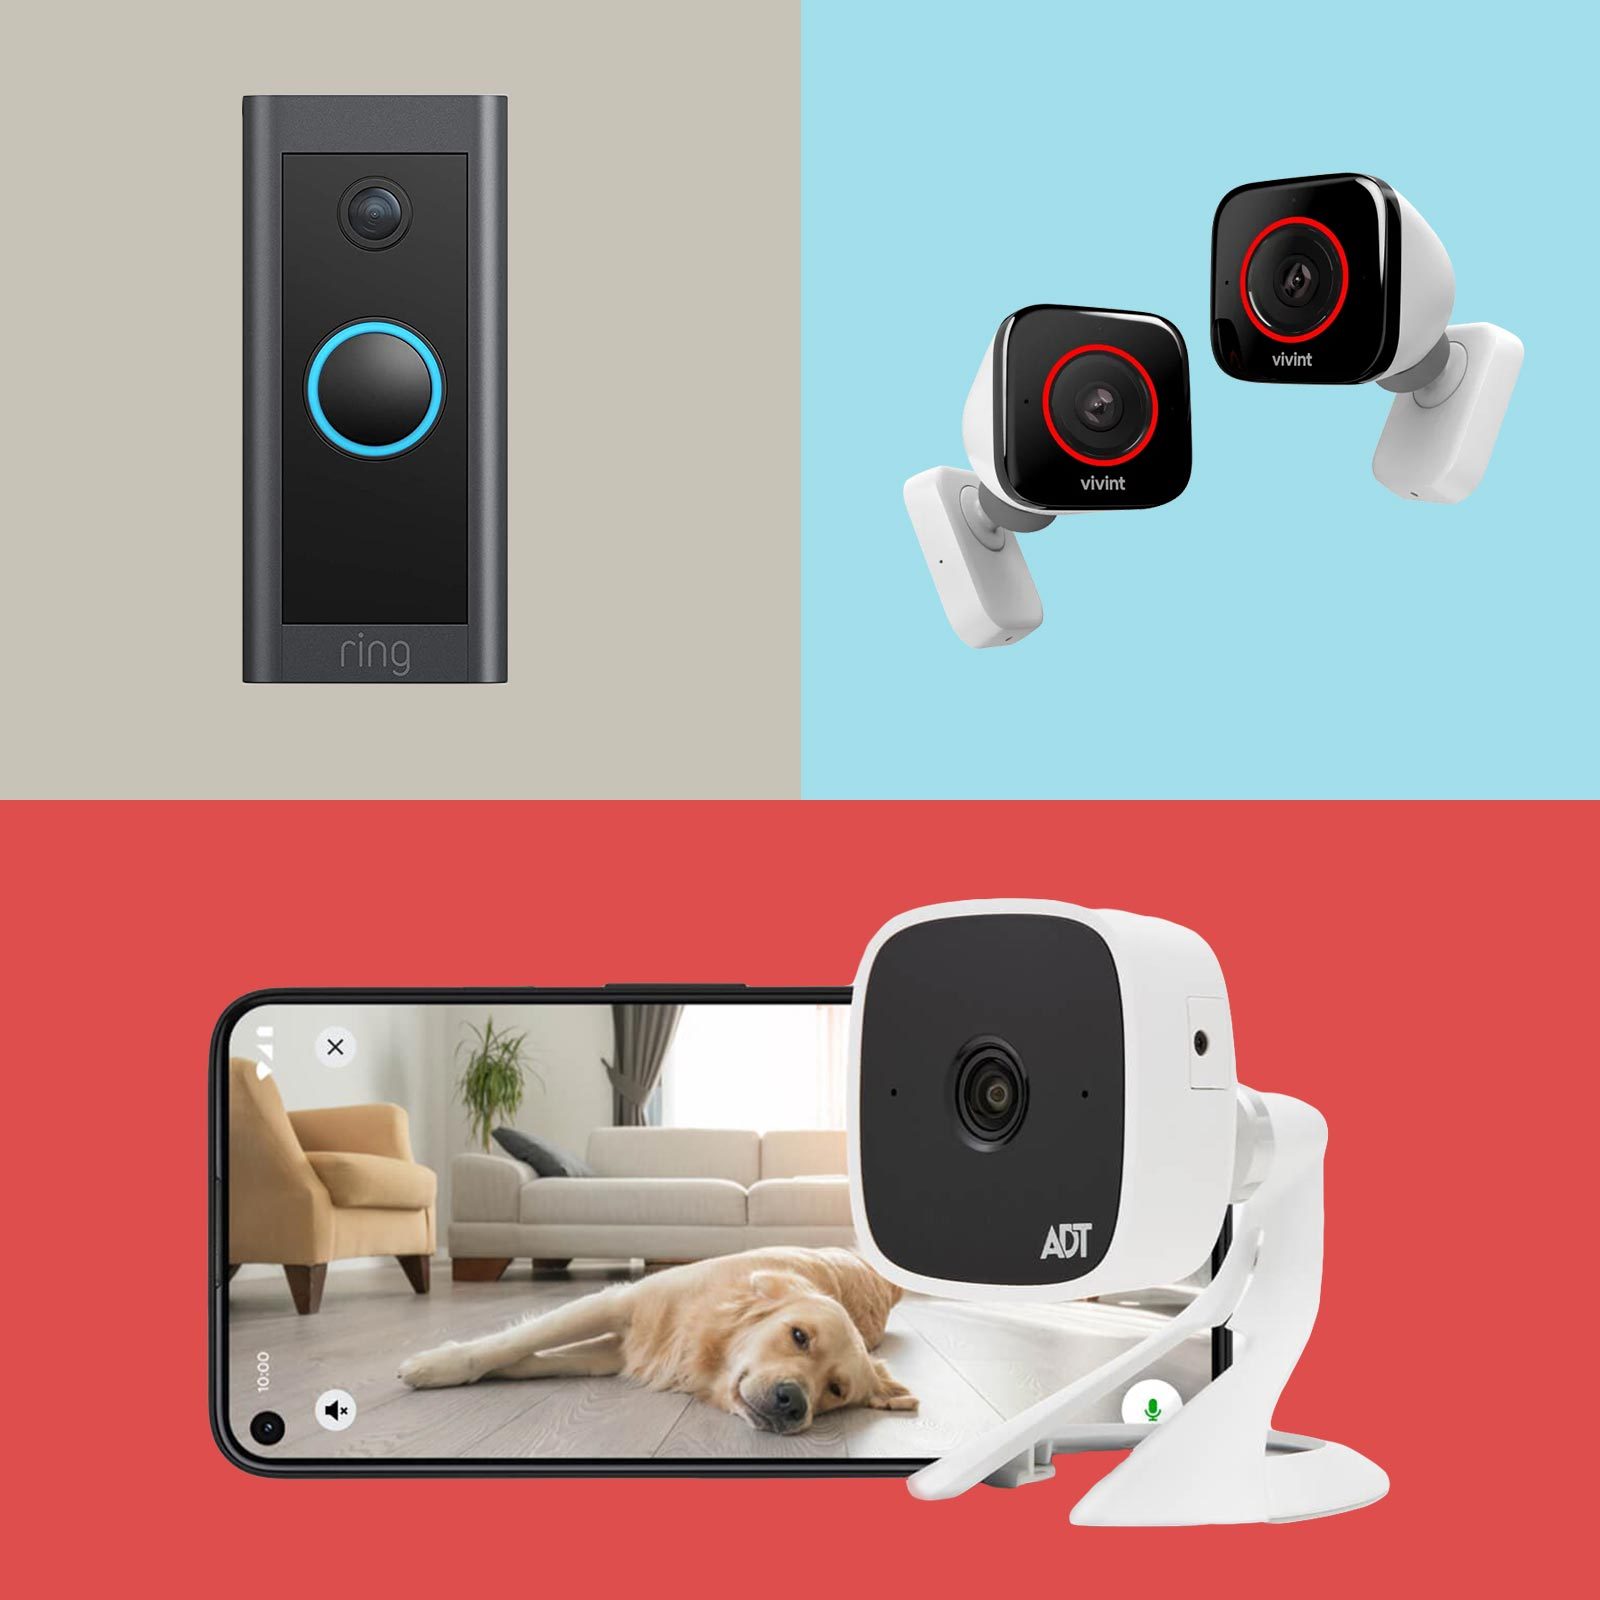 15 Best Home Security Systems to Buy in 2023, According to Experts